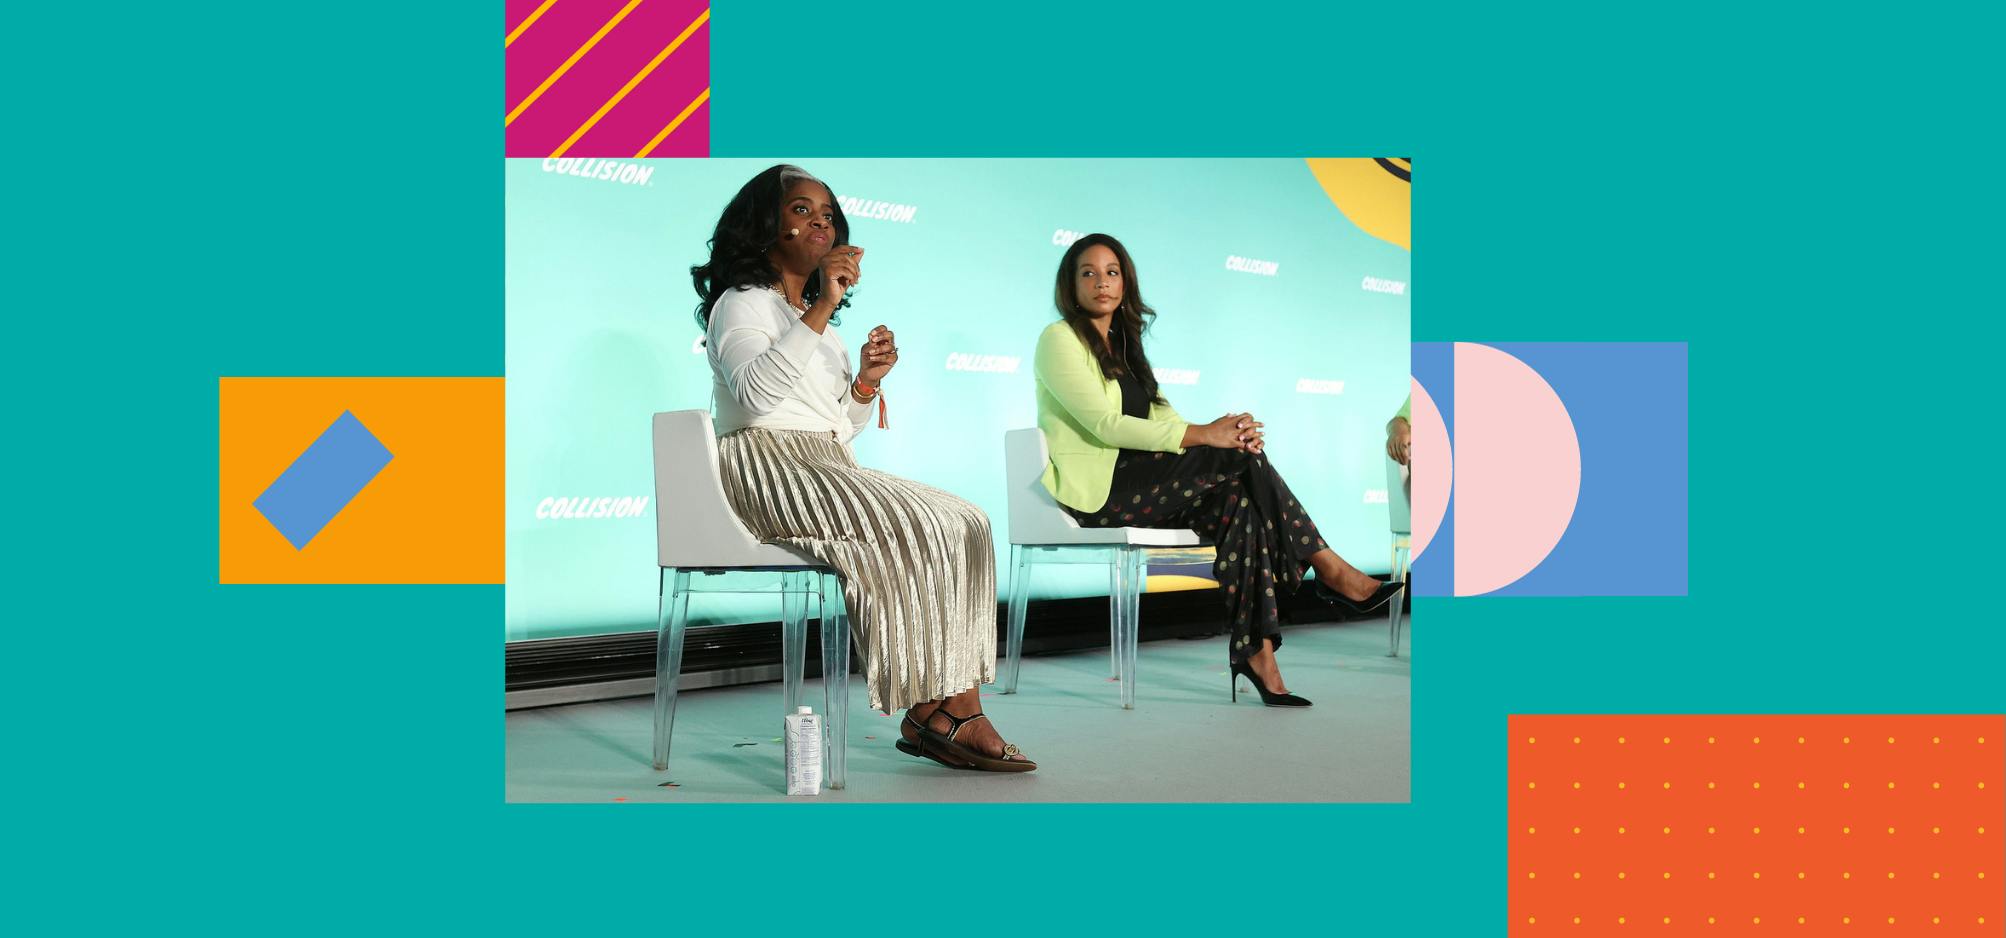 Image of two people (Kelly Burton, CEO, Black Innovation Alliance; Janaye Ingram, Director of Community Partner Programs & Engagement, Airbnb) sitting on stage on perspex and plastic chairs. The person on the left appears to be talking while the person on the right looks on.